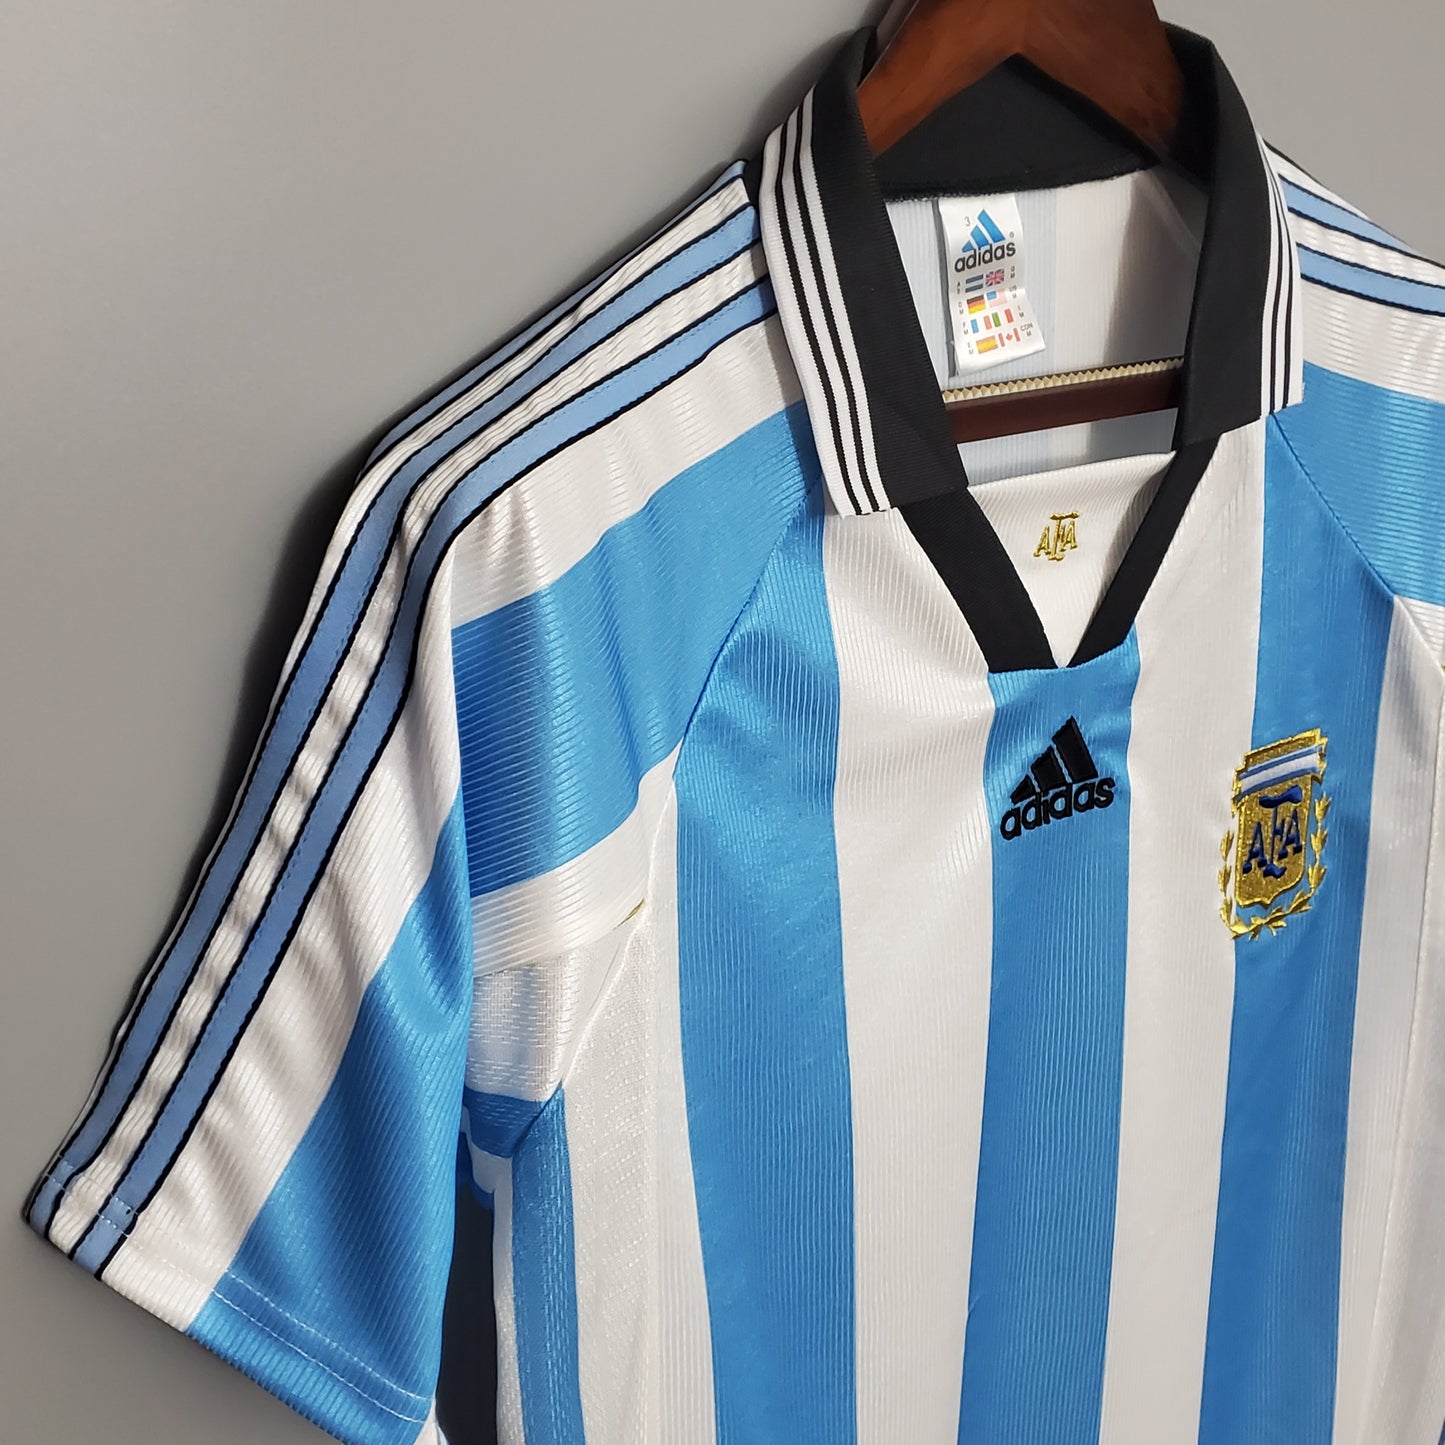 Argentina 1998 Home Jersey